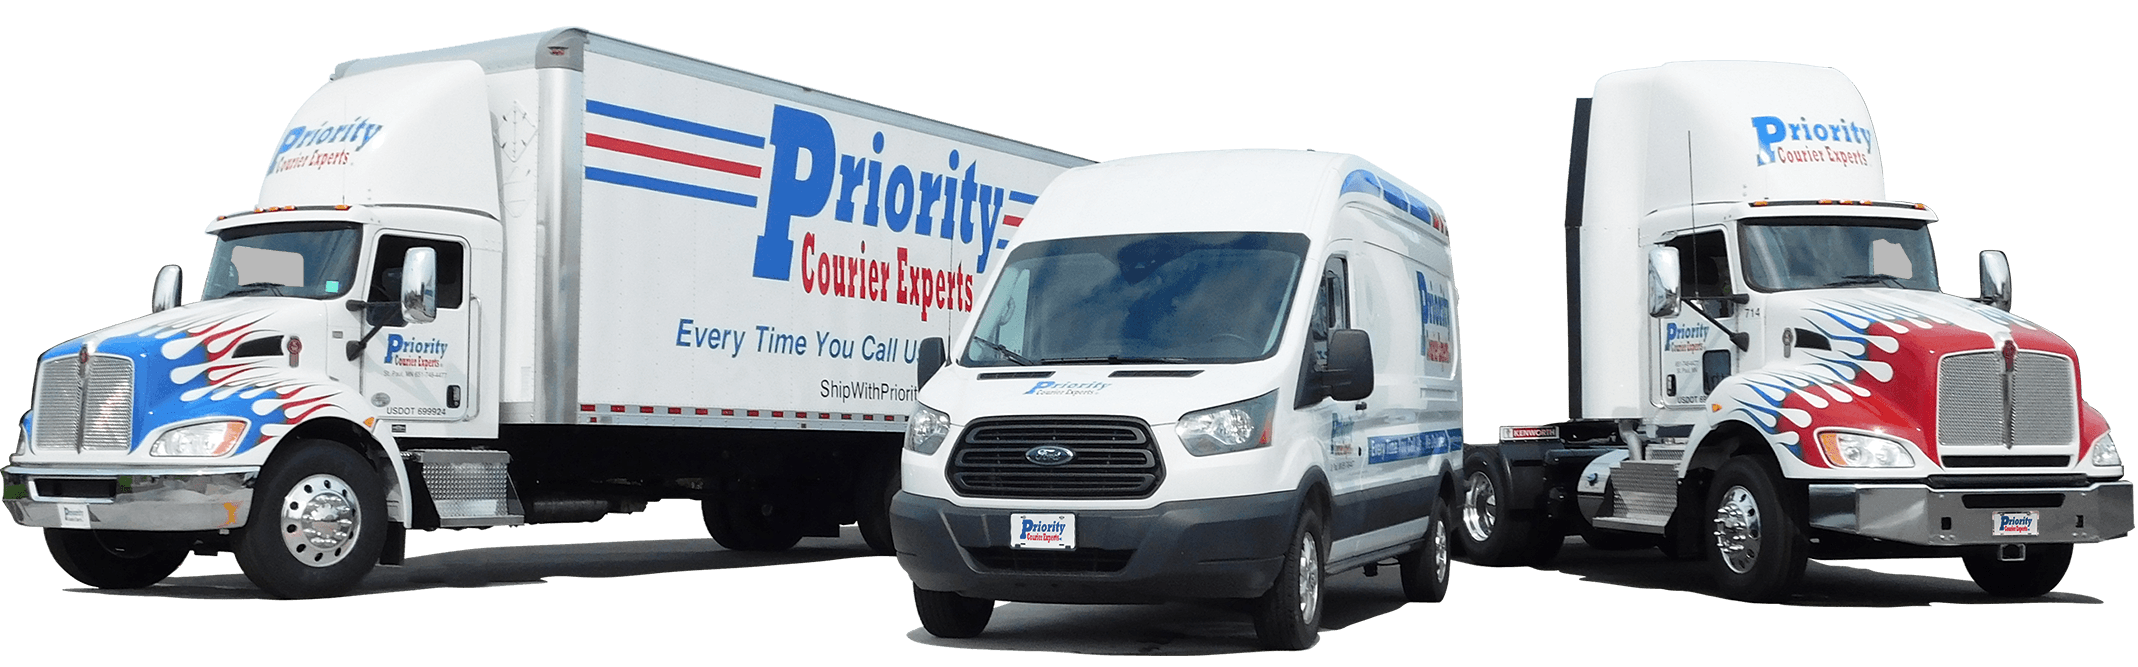 leasing a van for courier work